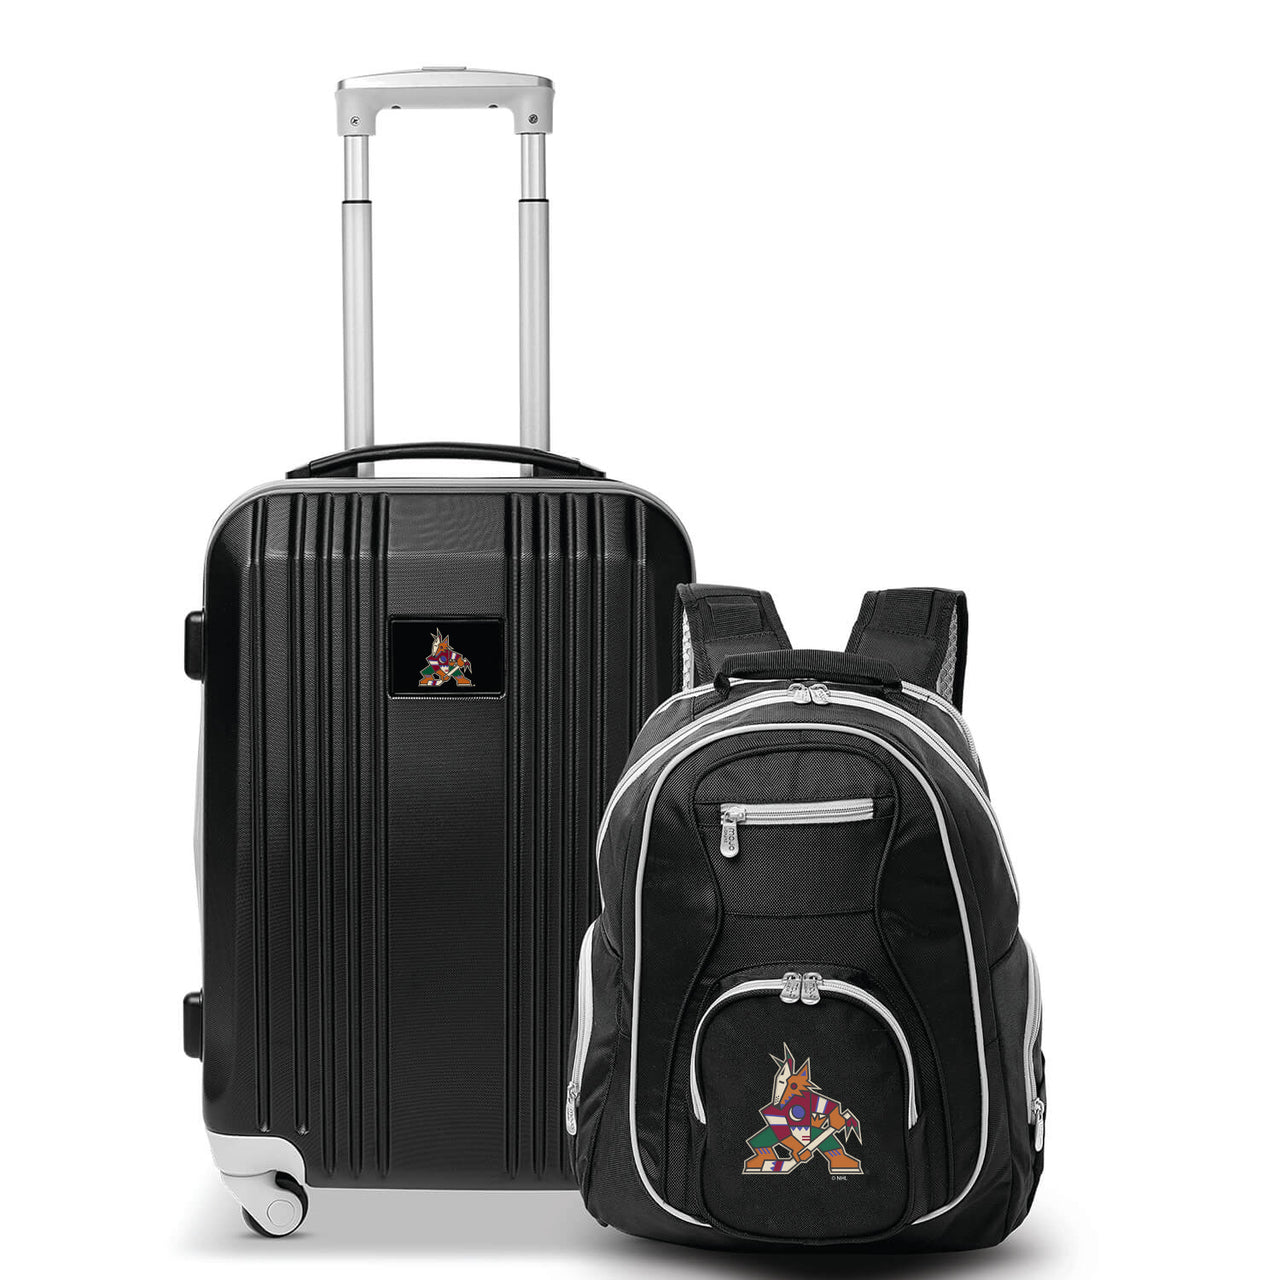 Arizona Coyotes 2 Piece Premium Colored Trim Backpack and Luggage Set